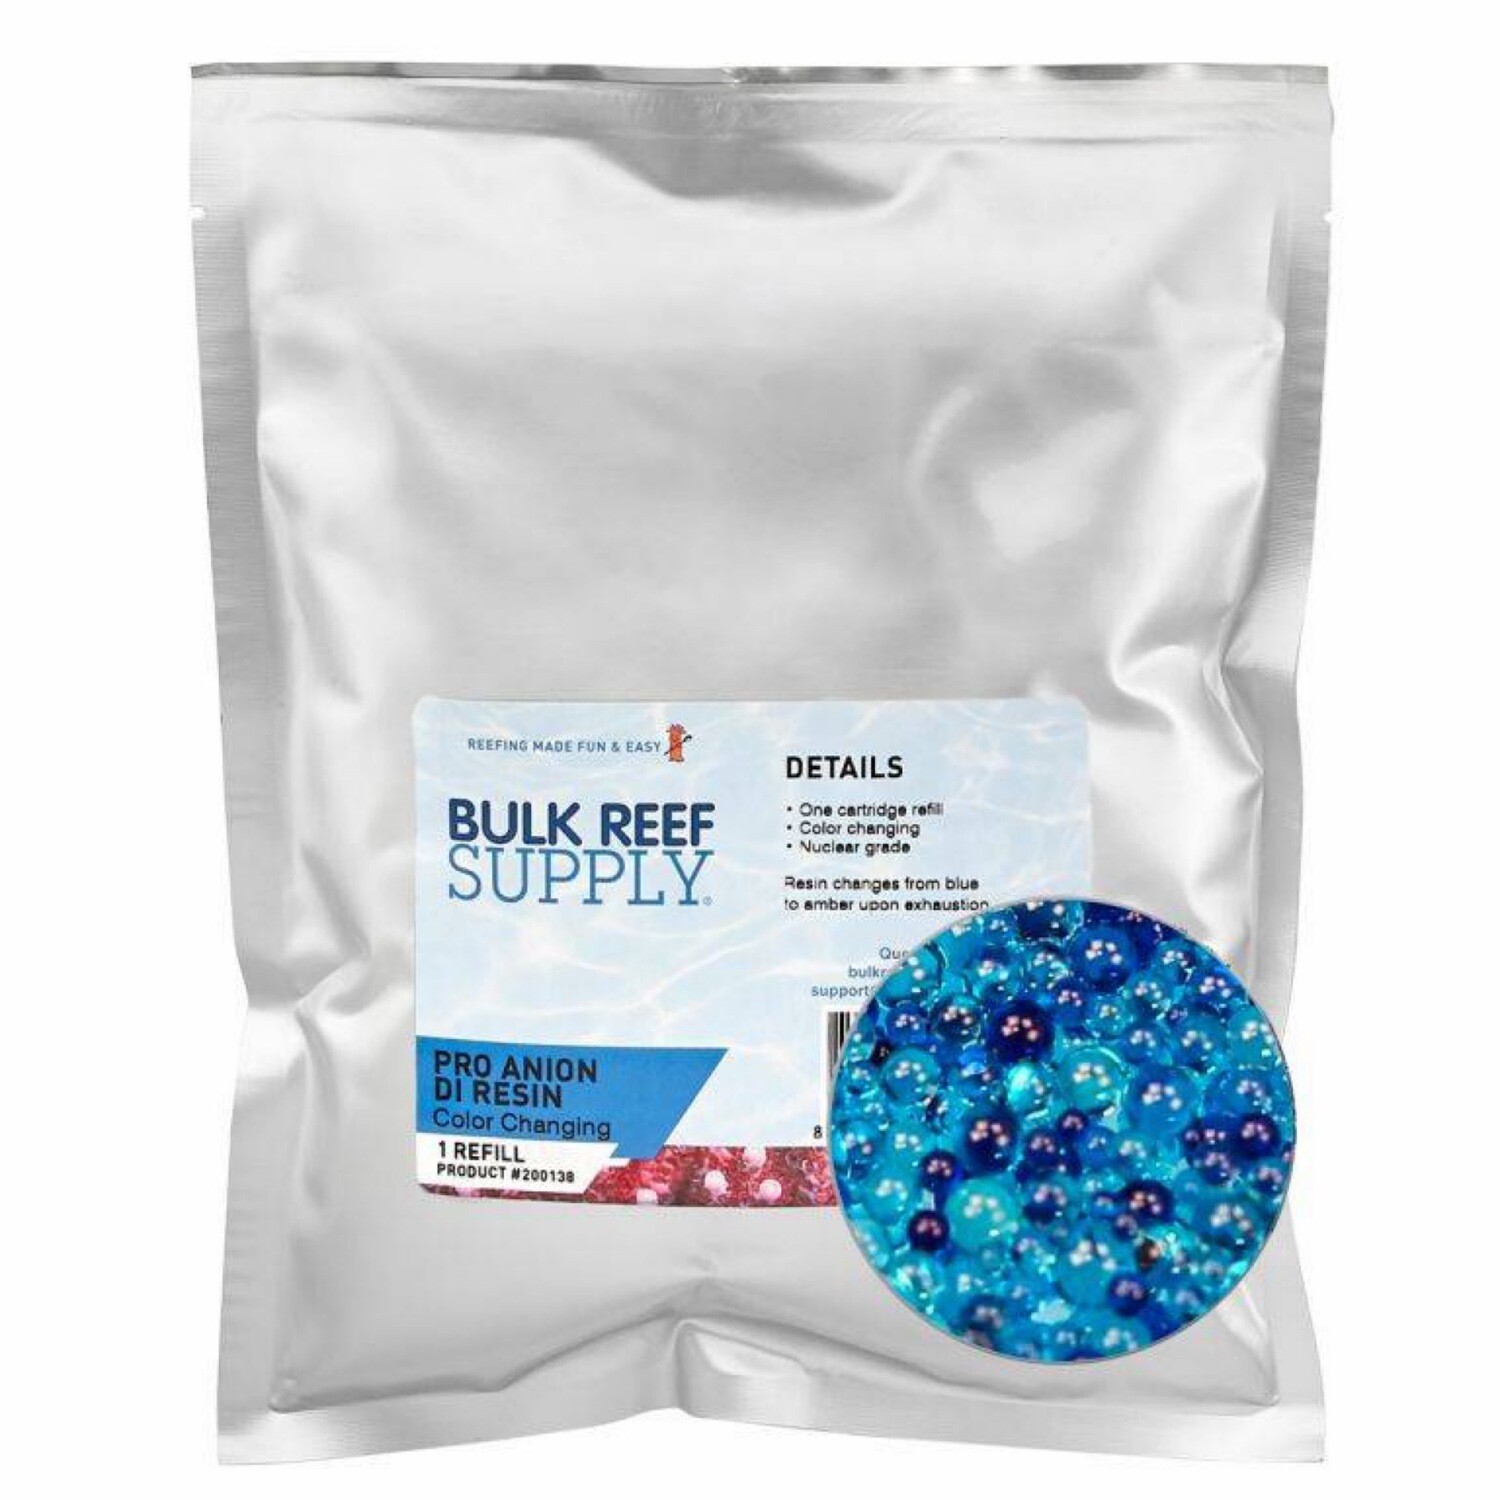 Bulk Reef Supply PRO Series Anion DI Resin (Color Changing) - Part 2 - Bulk Reef Supply